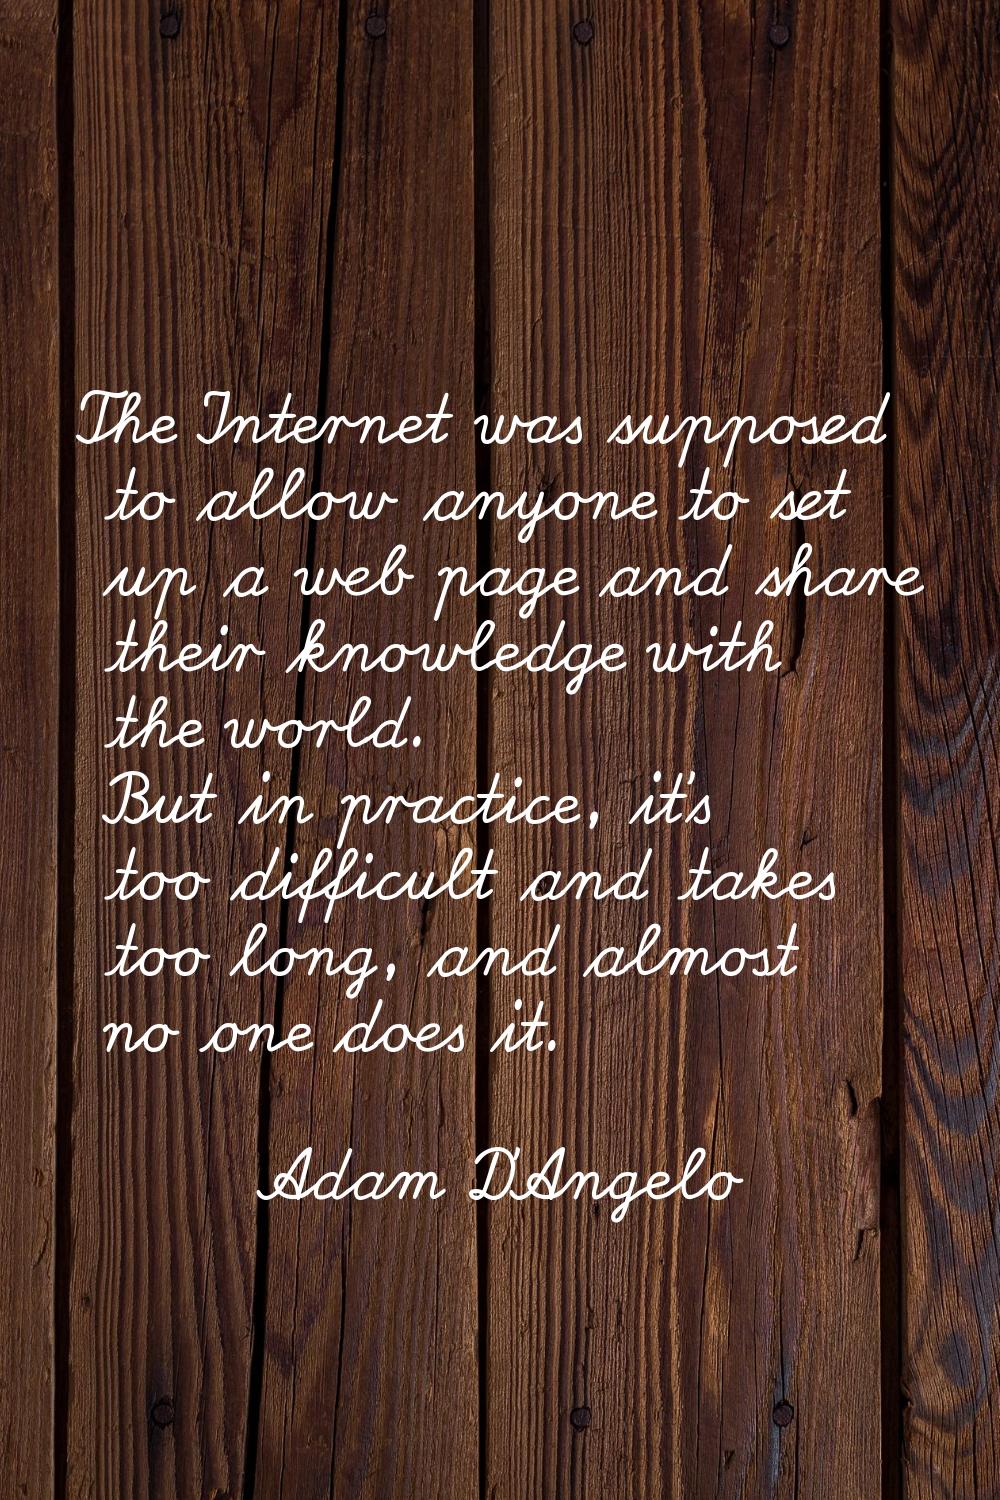 The Internet was supposed to allow anyone to set up a web page and share their knowledge with the w